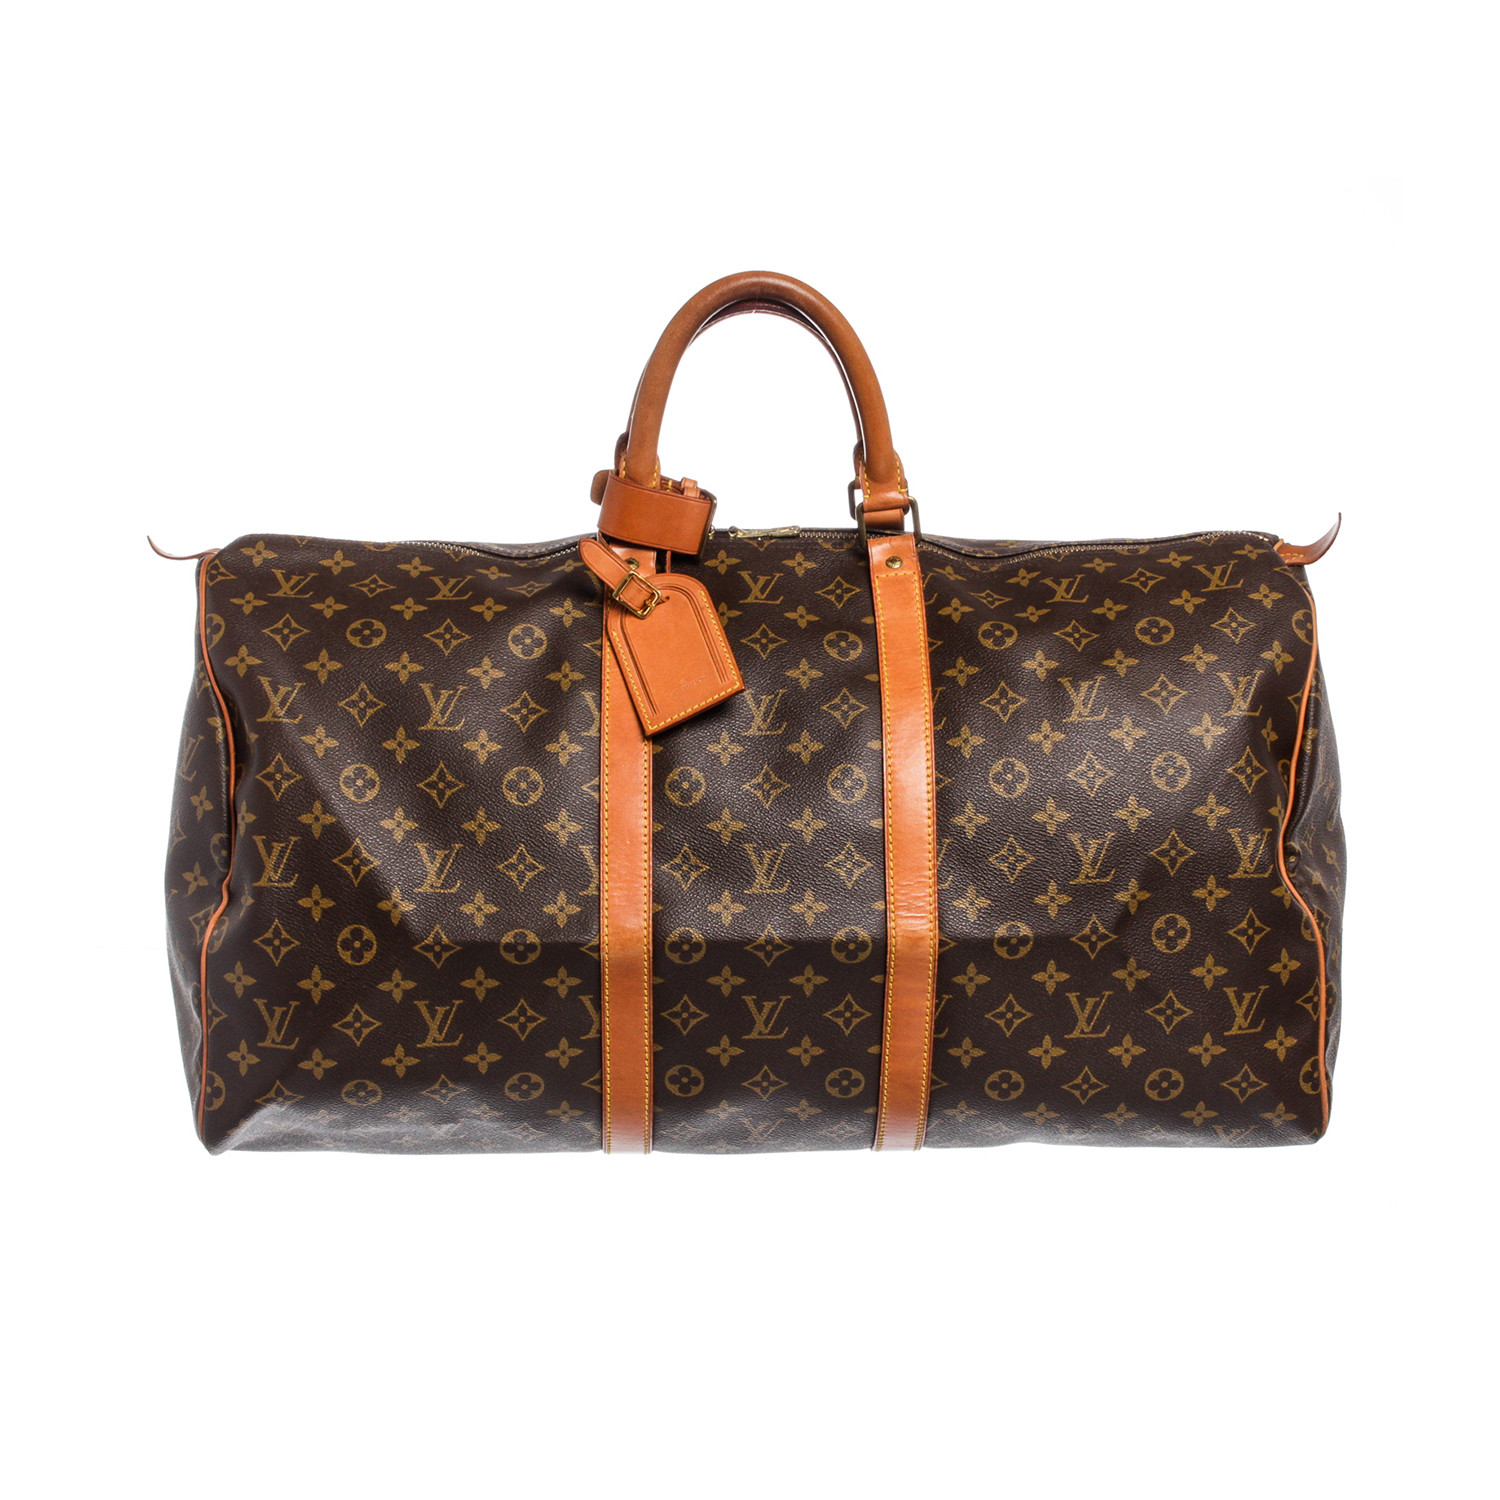 Louis Vuitton // Monogram Canvas Leather Keepall 55 cm Duffle Bag Luggage // MI0921 // Pre-Owned ...